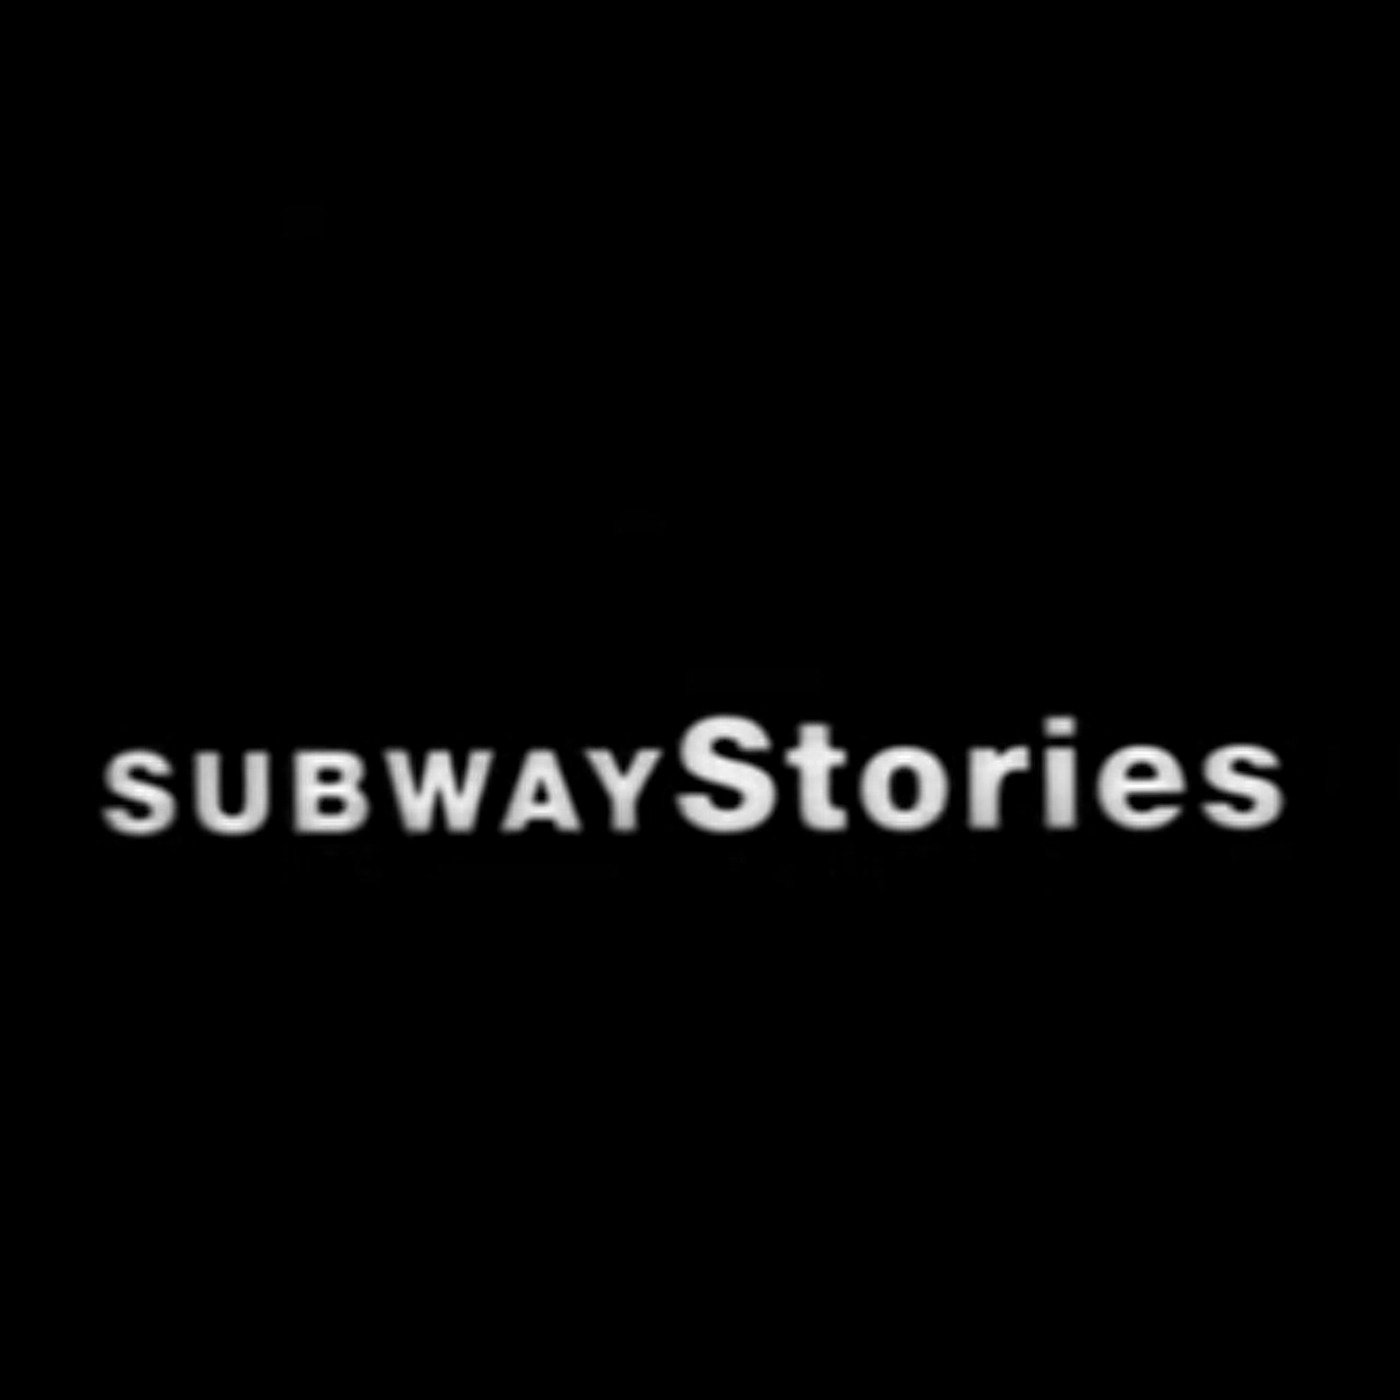 bea akers recommends Rosie Perez Subway Stories